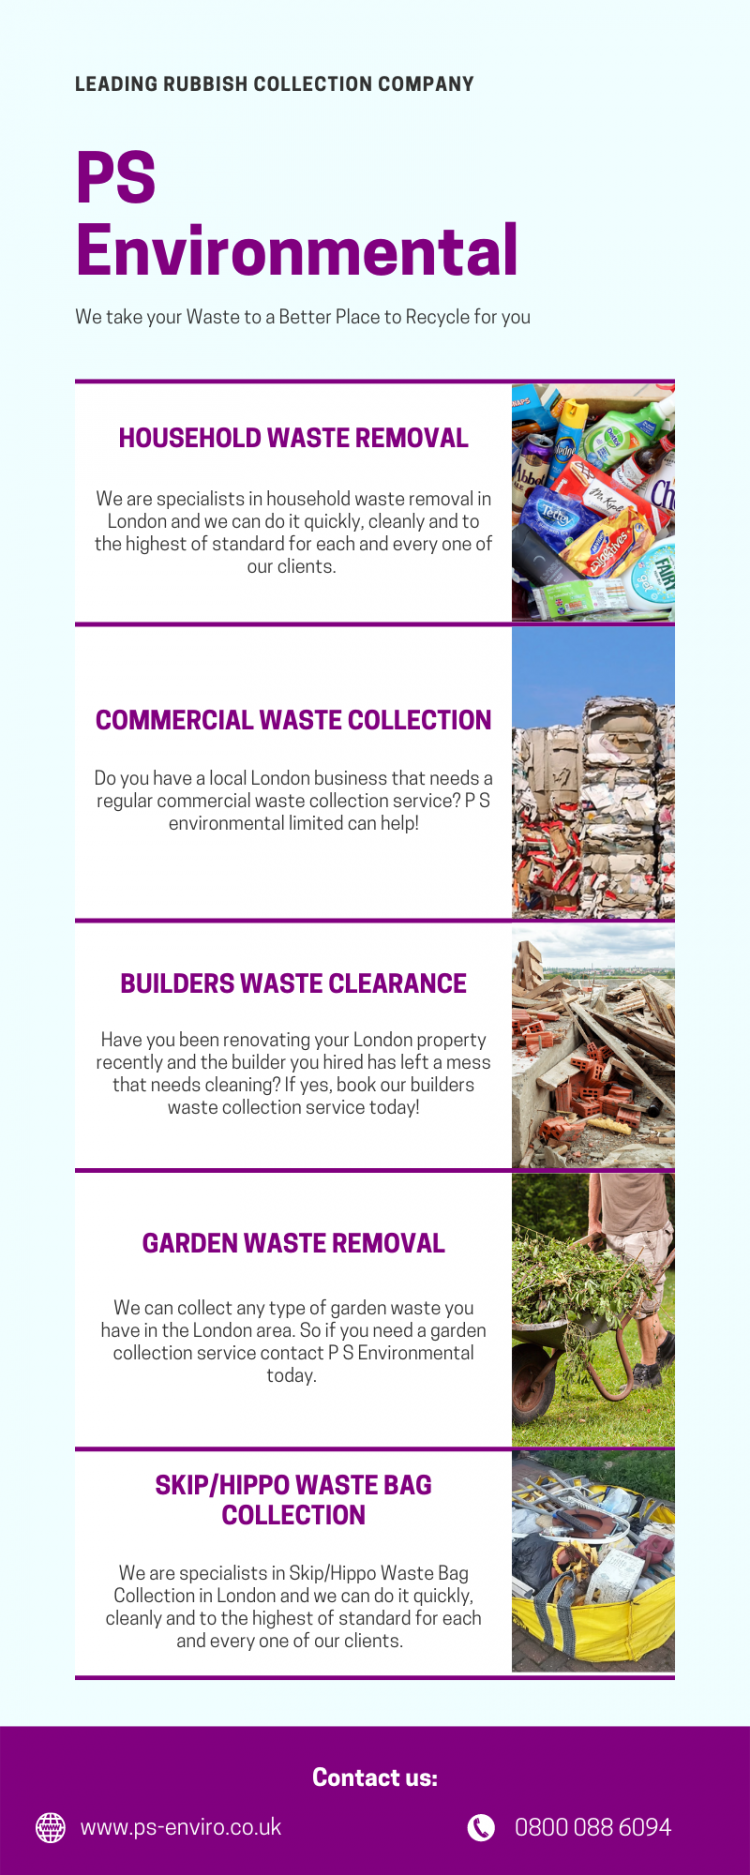 PS Environmental Limited is a leading rubbish collection company and takes great pride in offering trouble-free and reliable service to all clients. We offer competitive rates and are often a cheaper option than a skip! 


https://ps-enviro.co.uk/